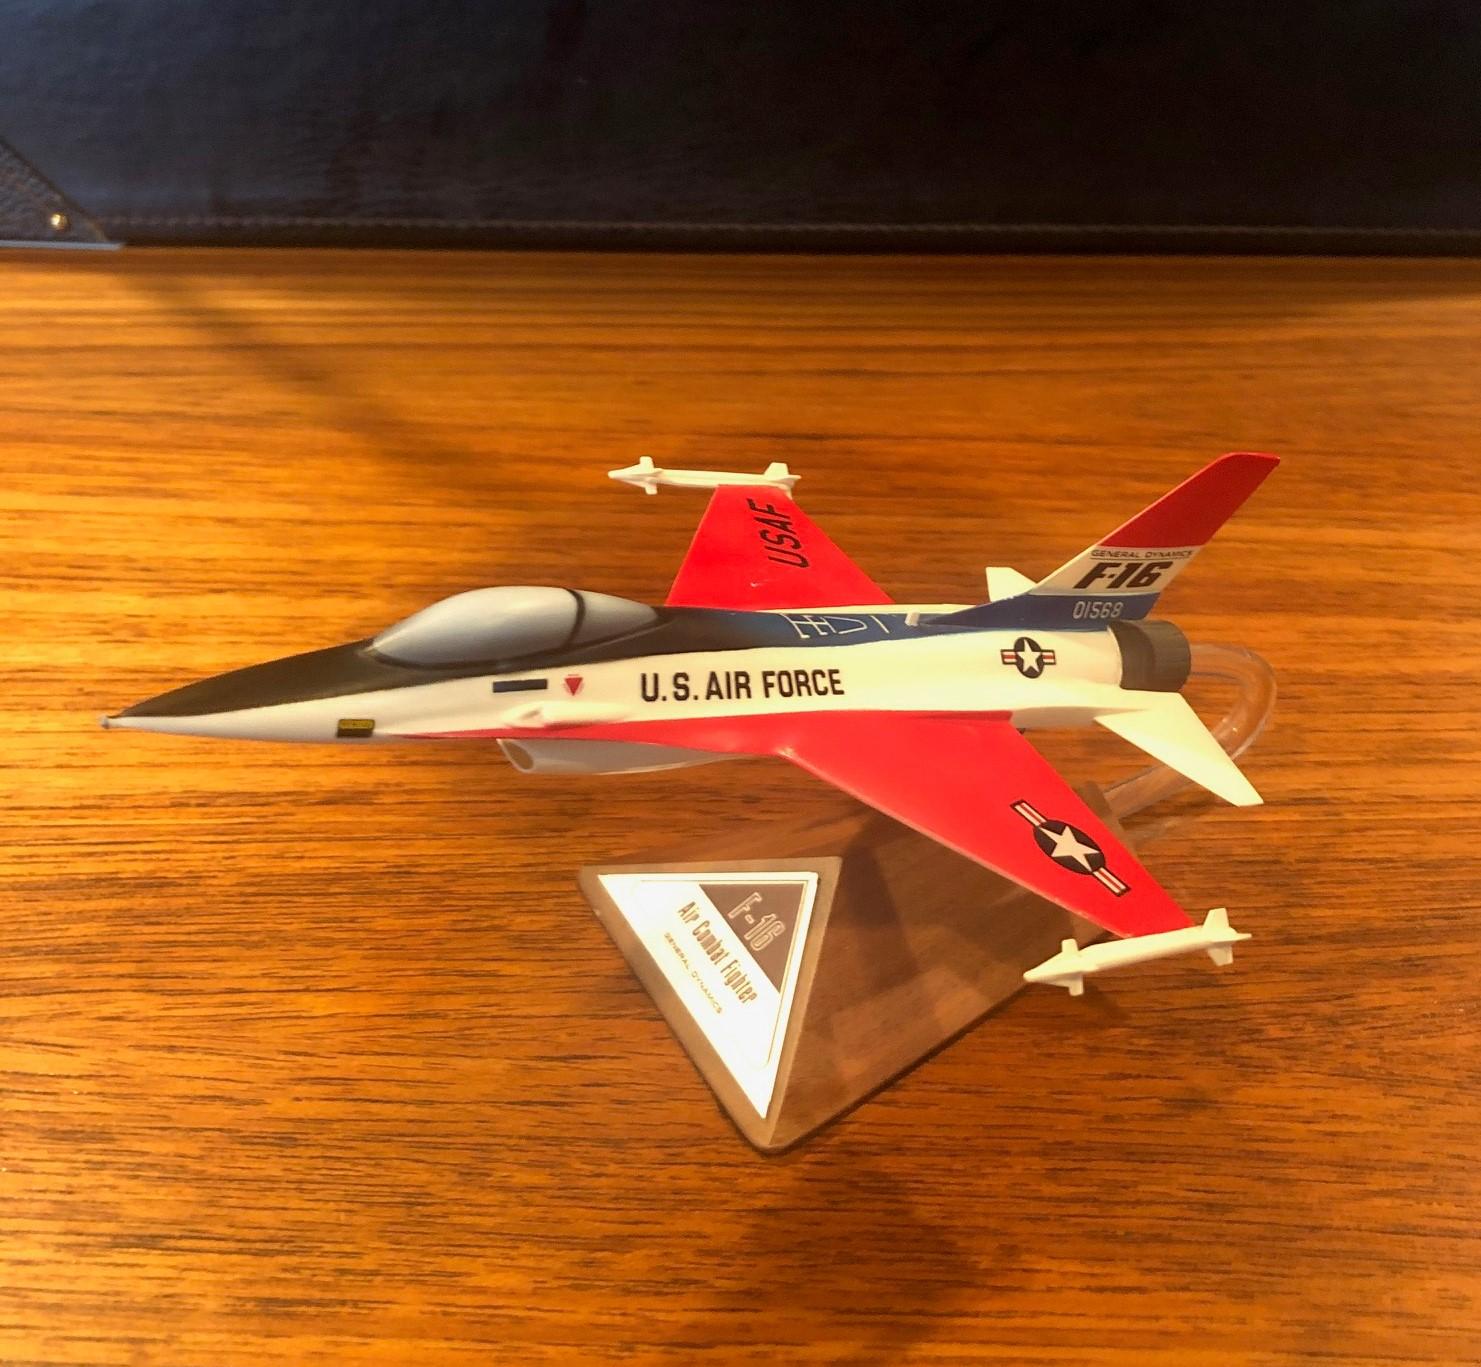 A very cool U.S. Air Force F-16 air combat fighter contractor desk model, circa 1990s. The General Dynamics model is in good condition and measures 5.25